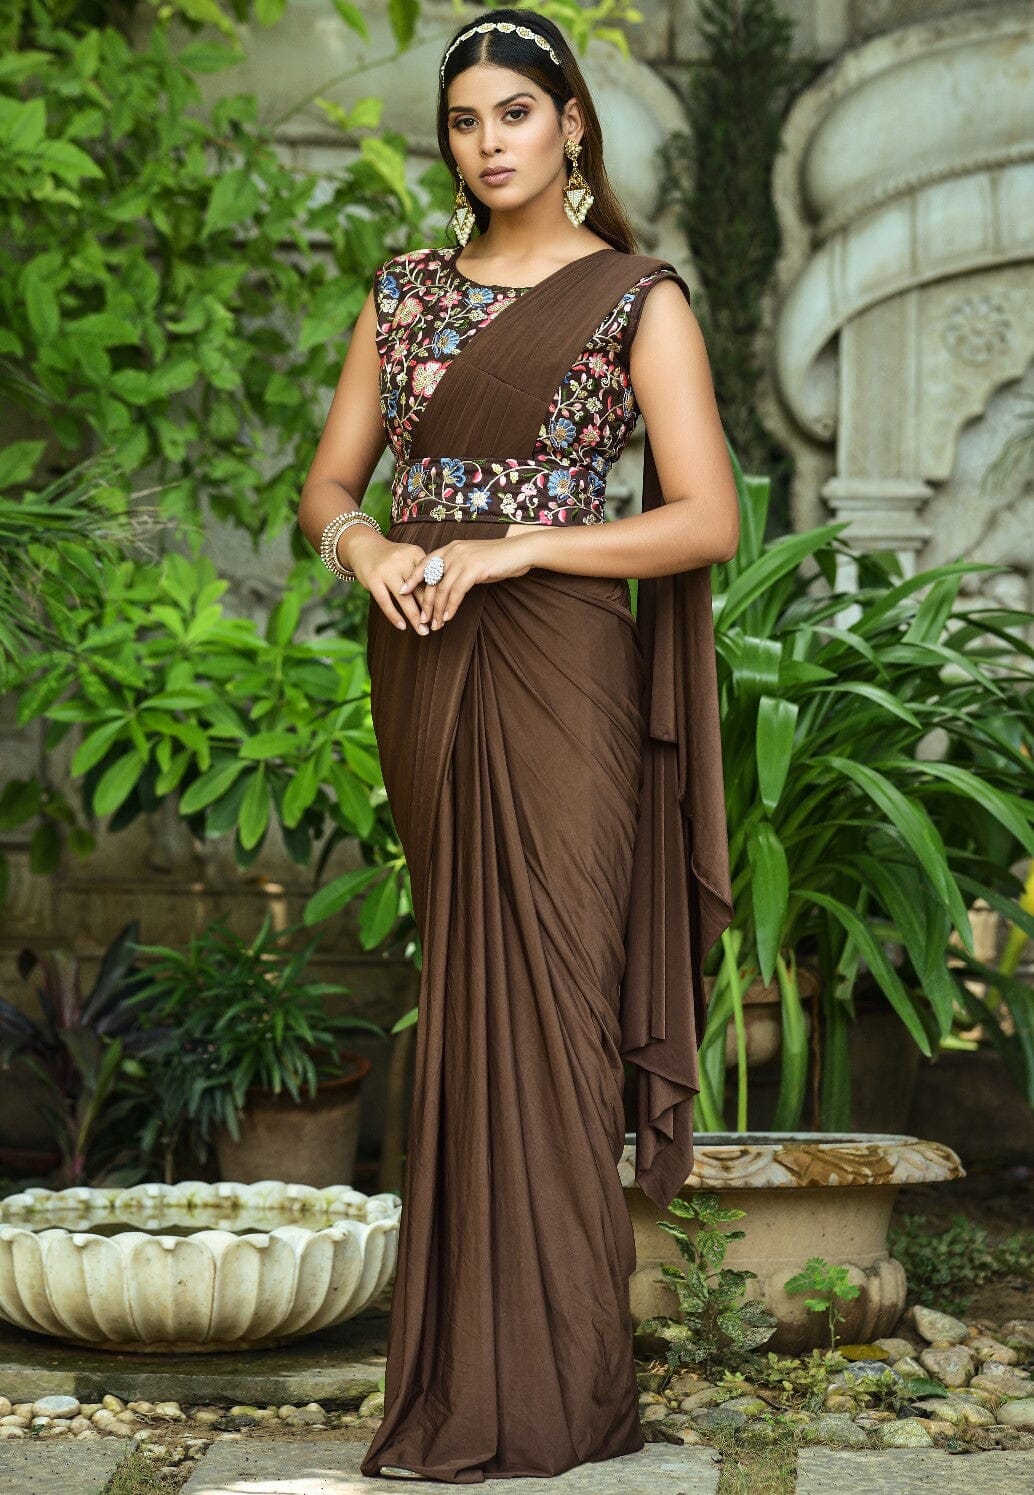 Chocolate Brown Solid Pleated Designer Ruffle Ready To Wear Saree Ready to Wear Saree Shopin Di Apparels 